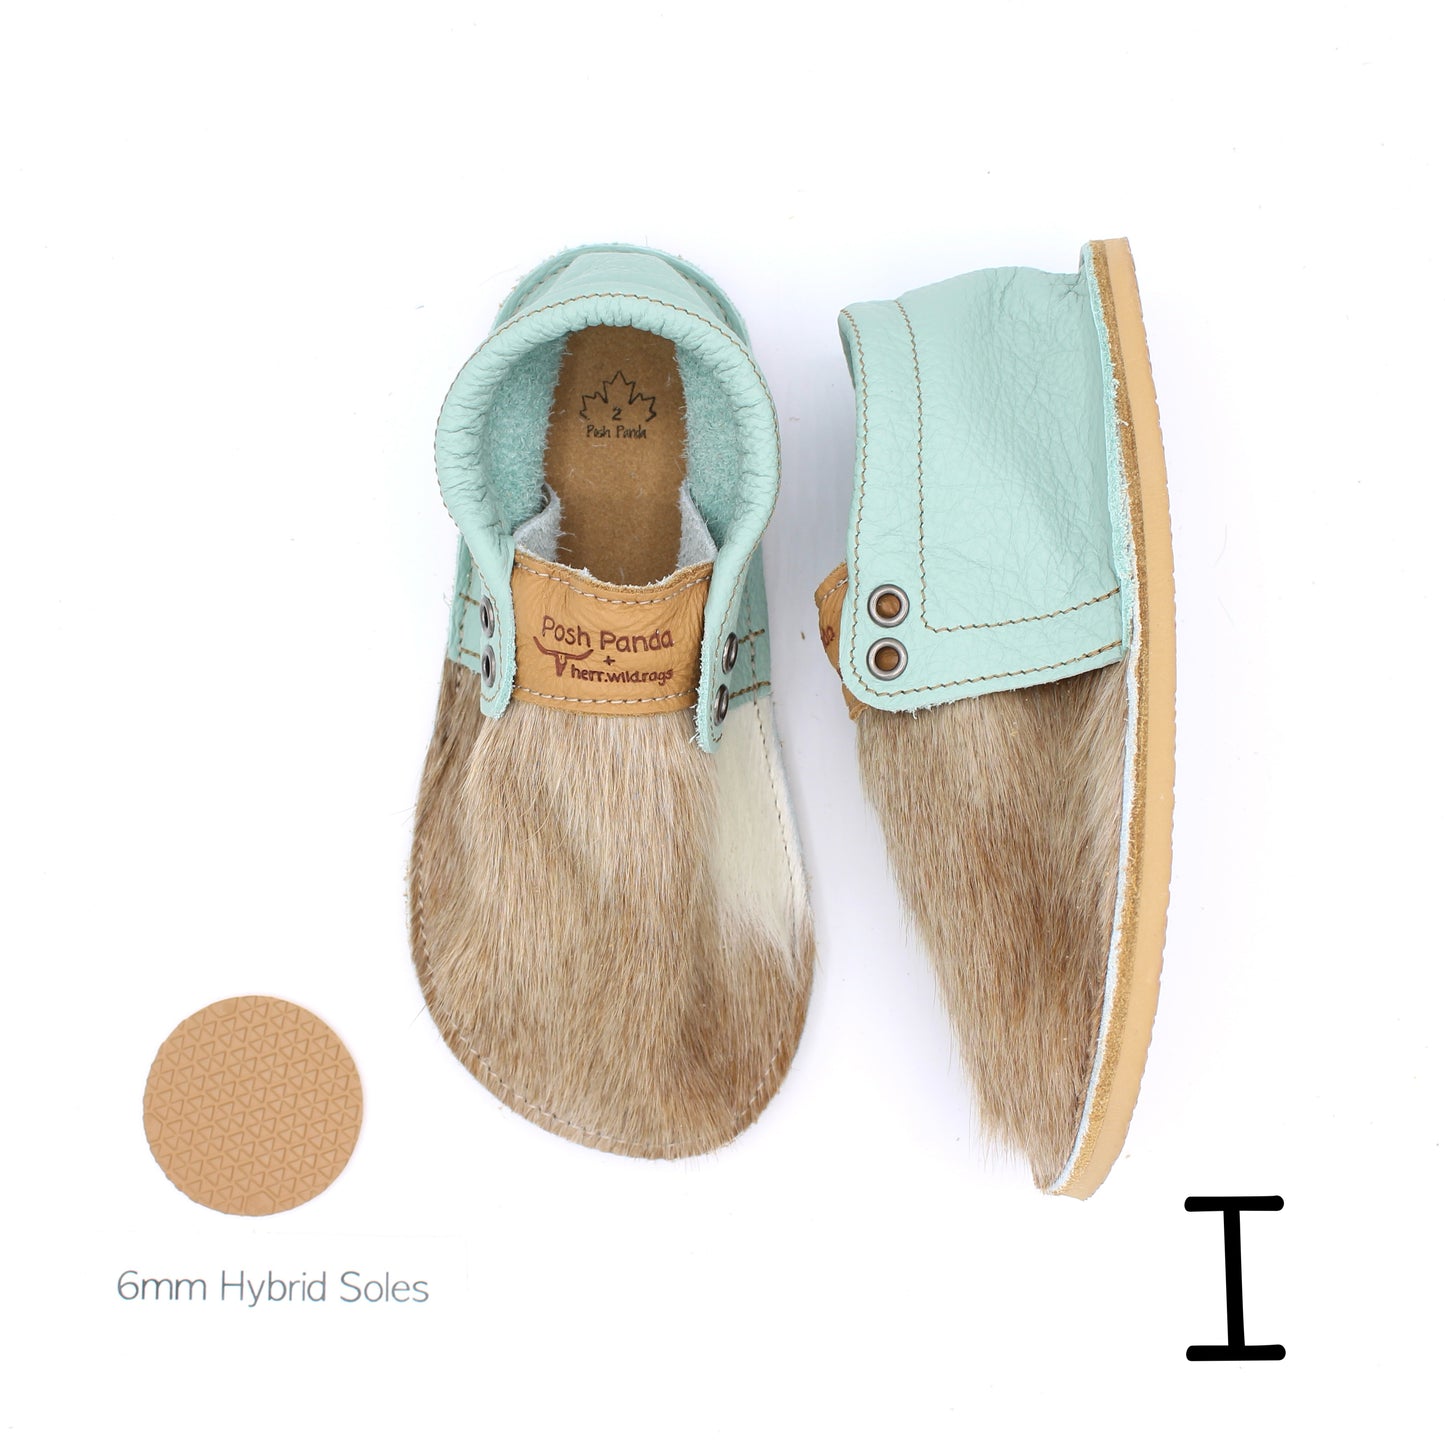 Hair Hide Mocs - YOUTH - Size 2 (4mm Sole)